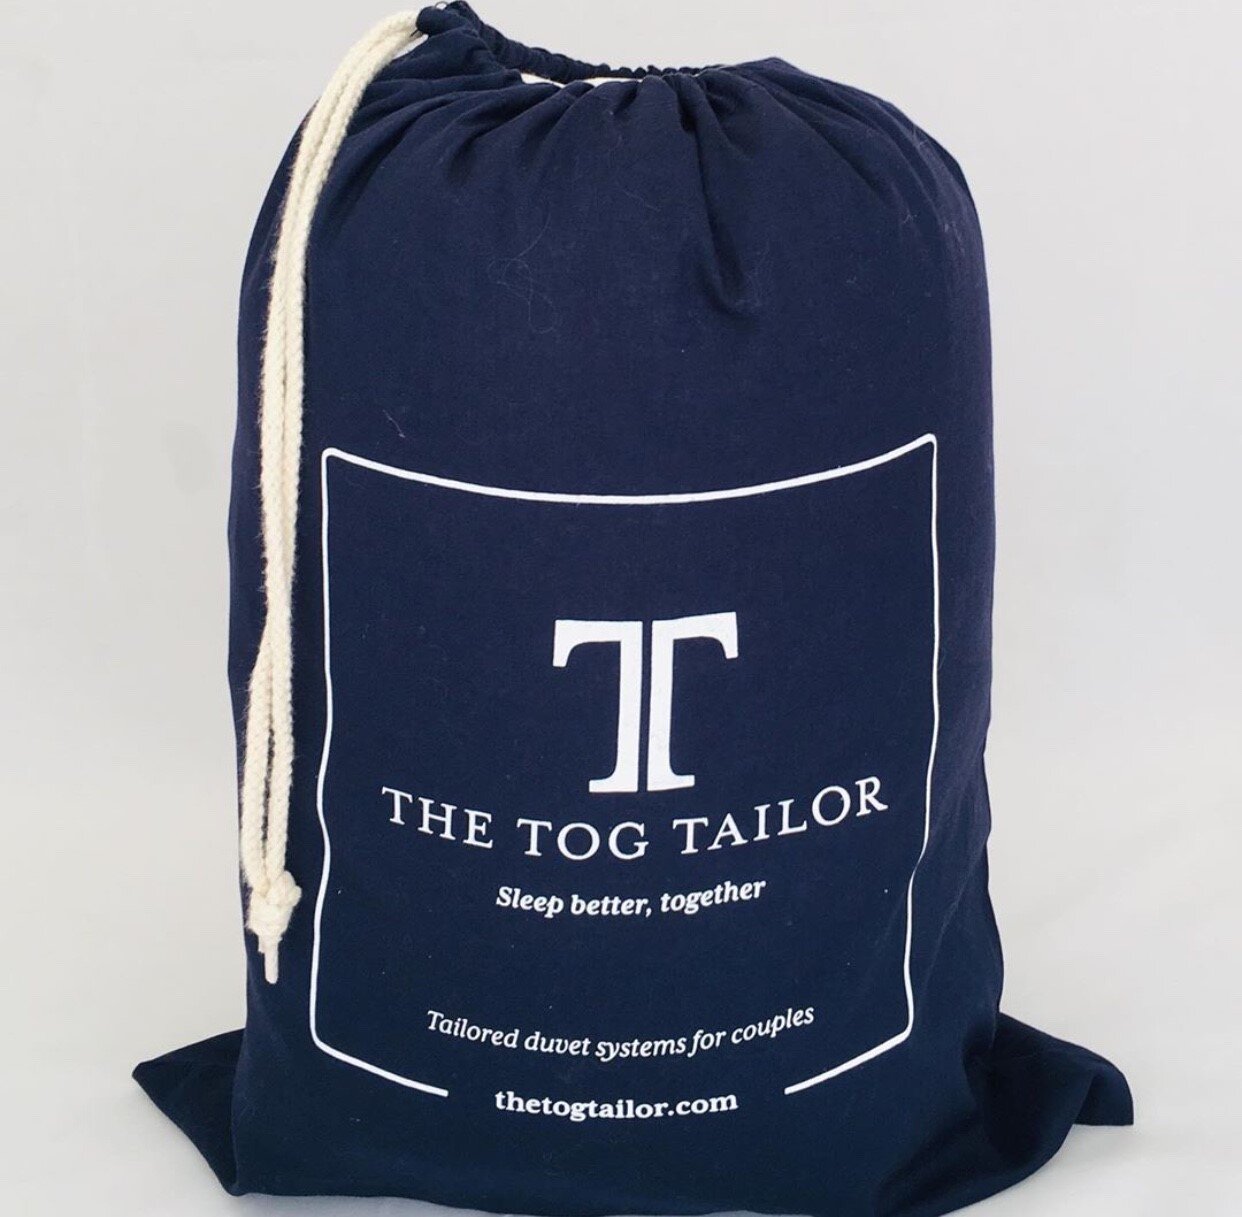 The Tog Tailor, from £50